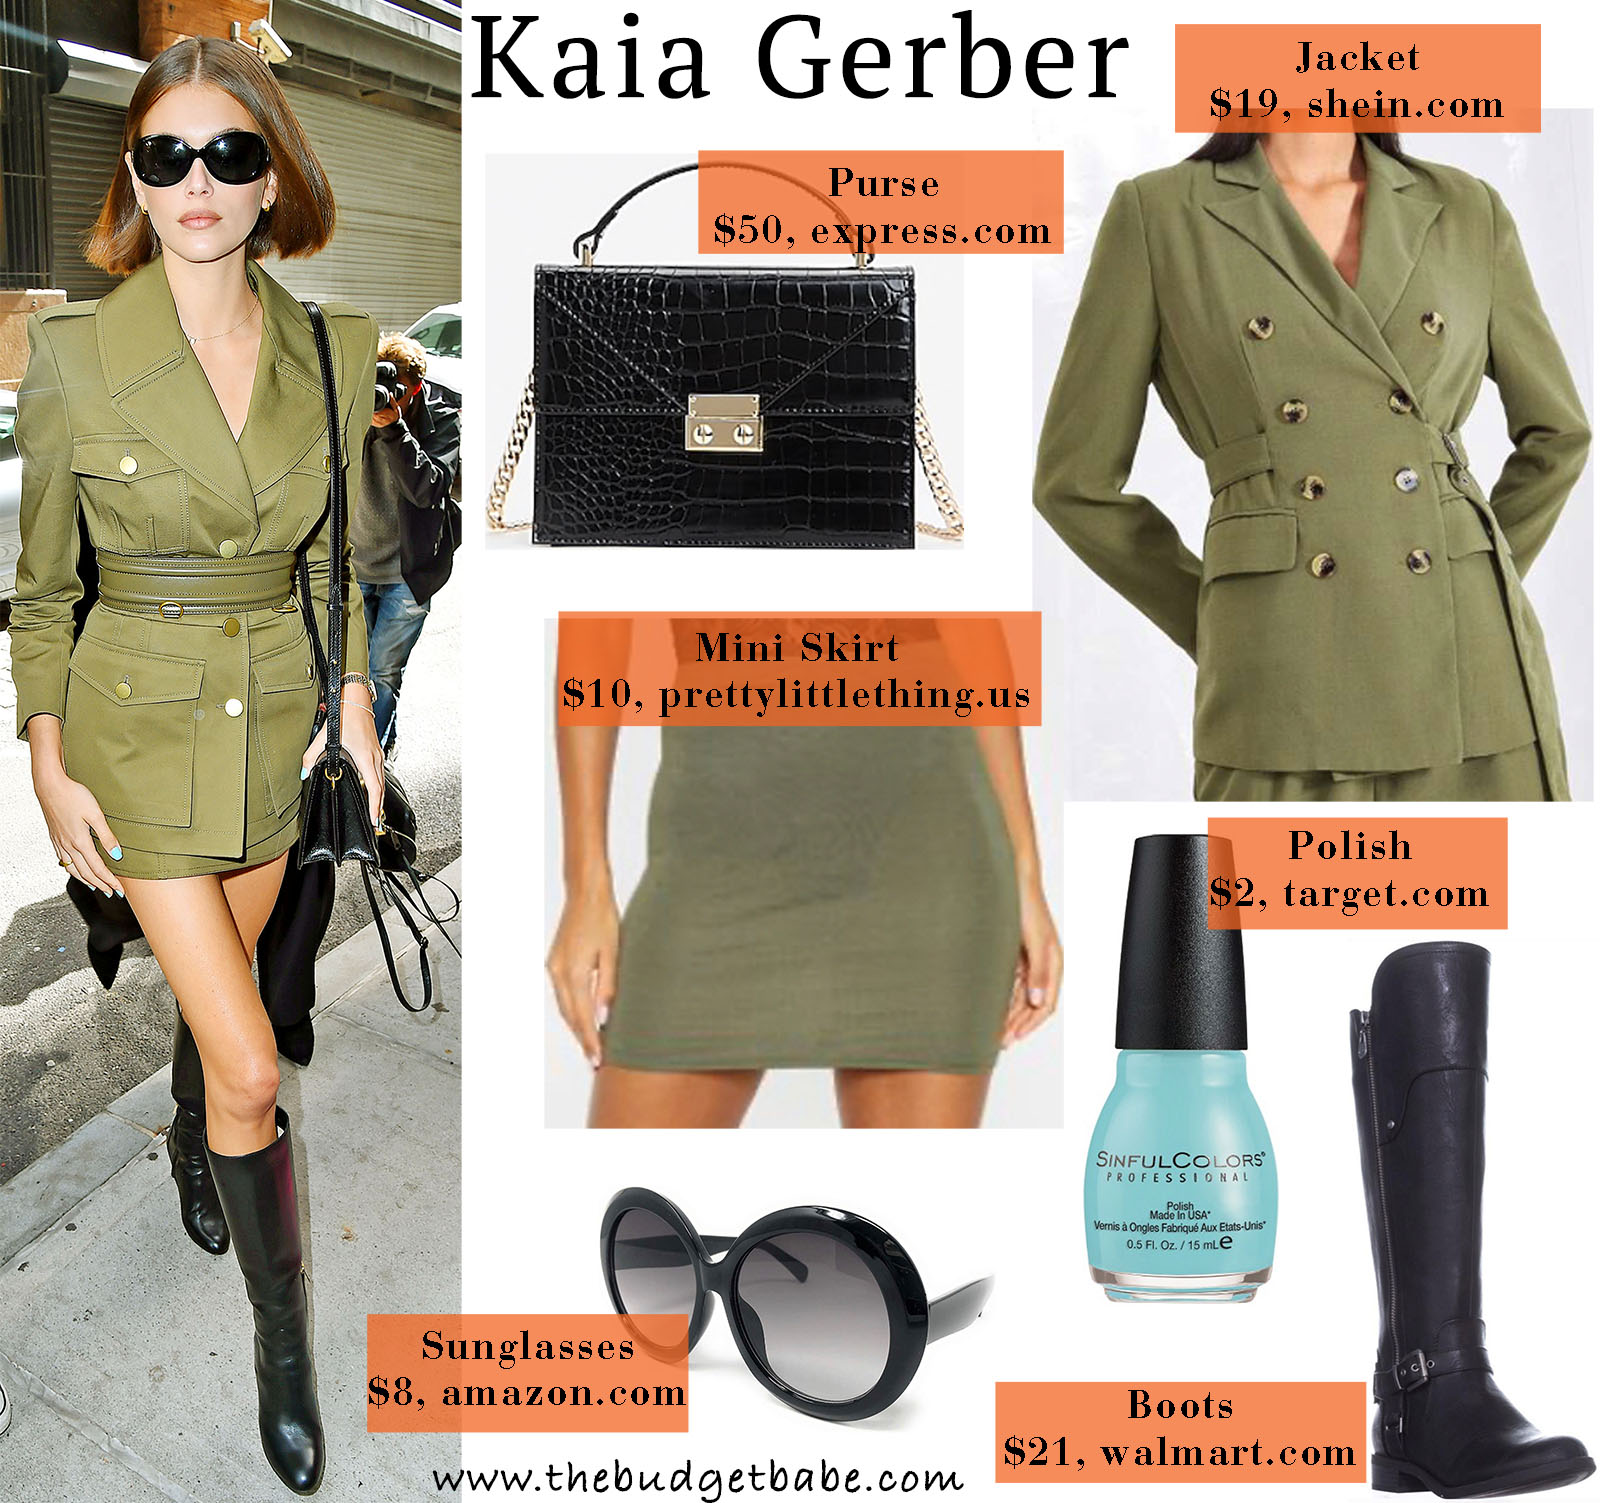 Kaia Gerber is impossibly chic in all green!